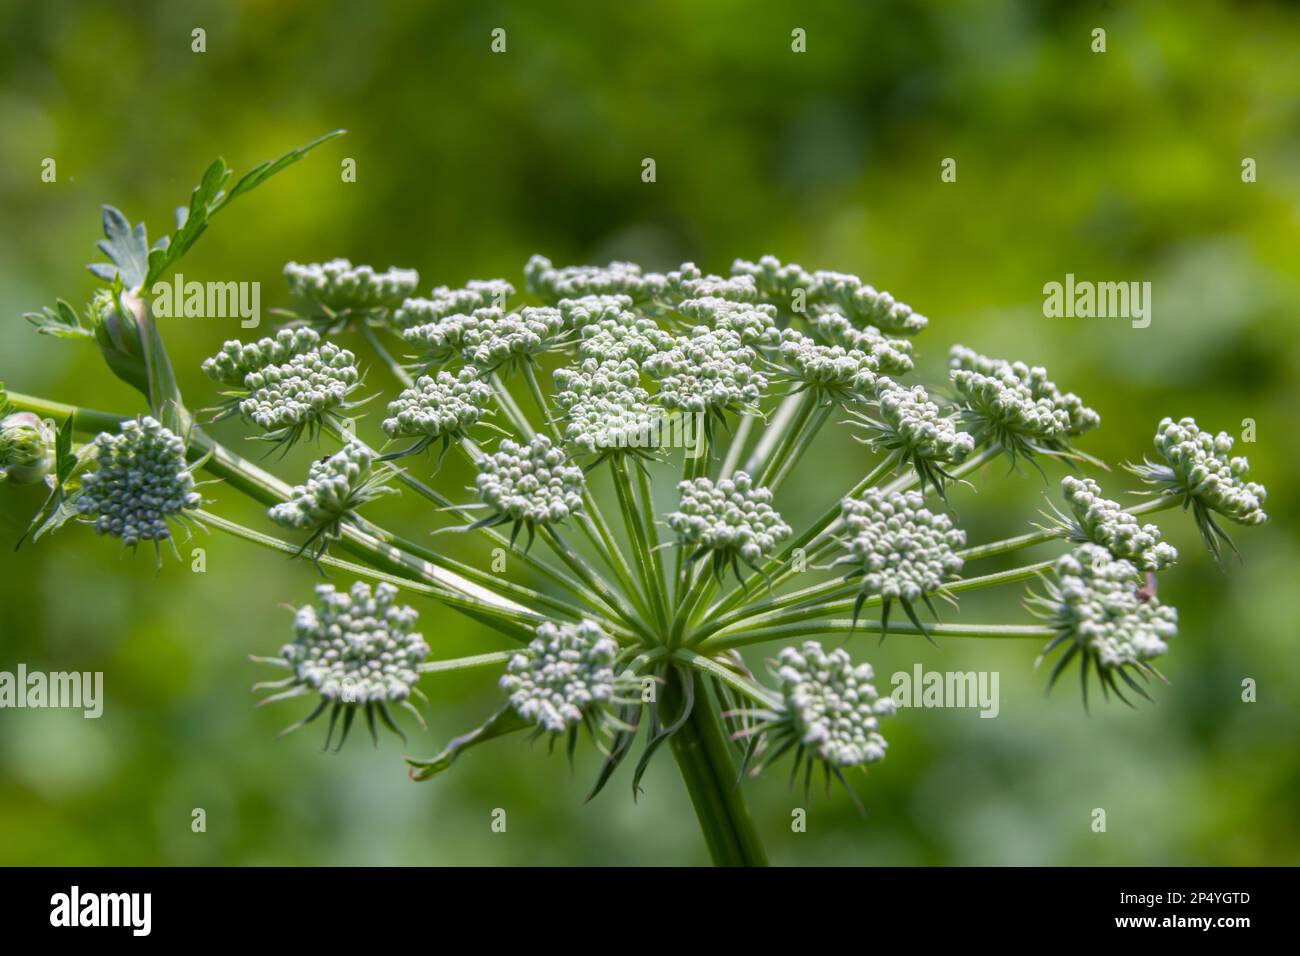 Flowering black cumin, Bunium bulbocastanum in the natural environment on a green background. Stock Photo